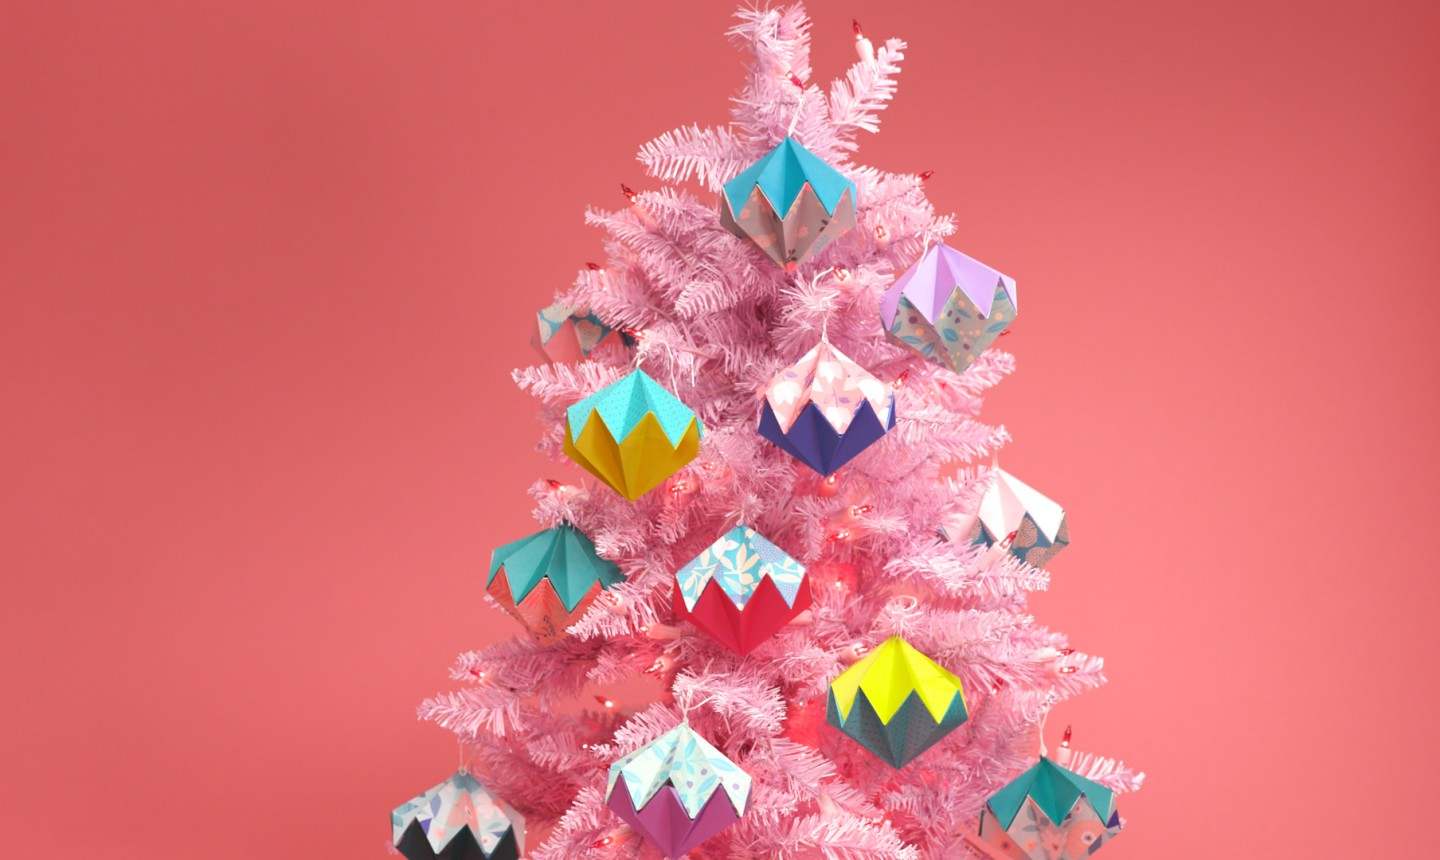 Easy Origami Christmas Ornaments Instructions These Diy Origami Ornaments Are Just So Cool